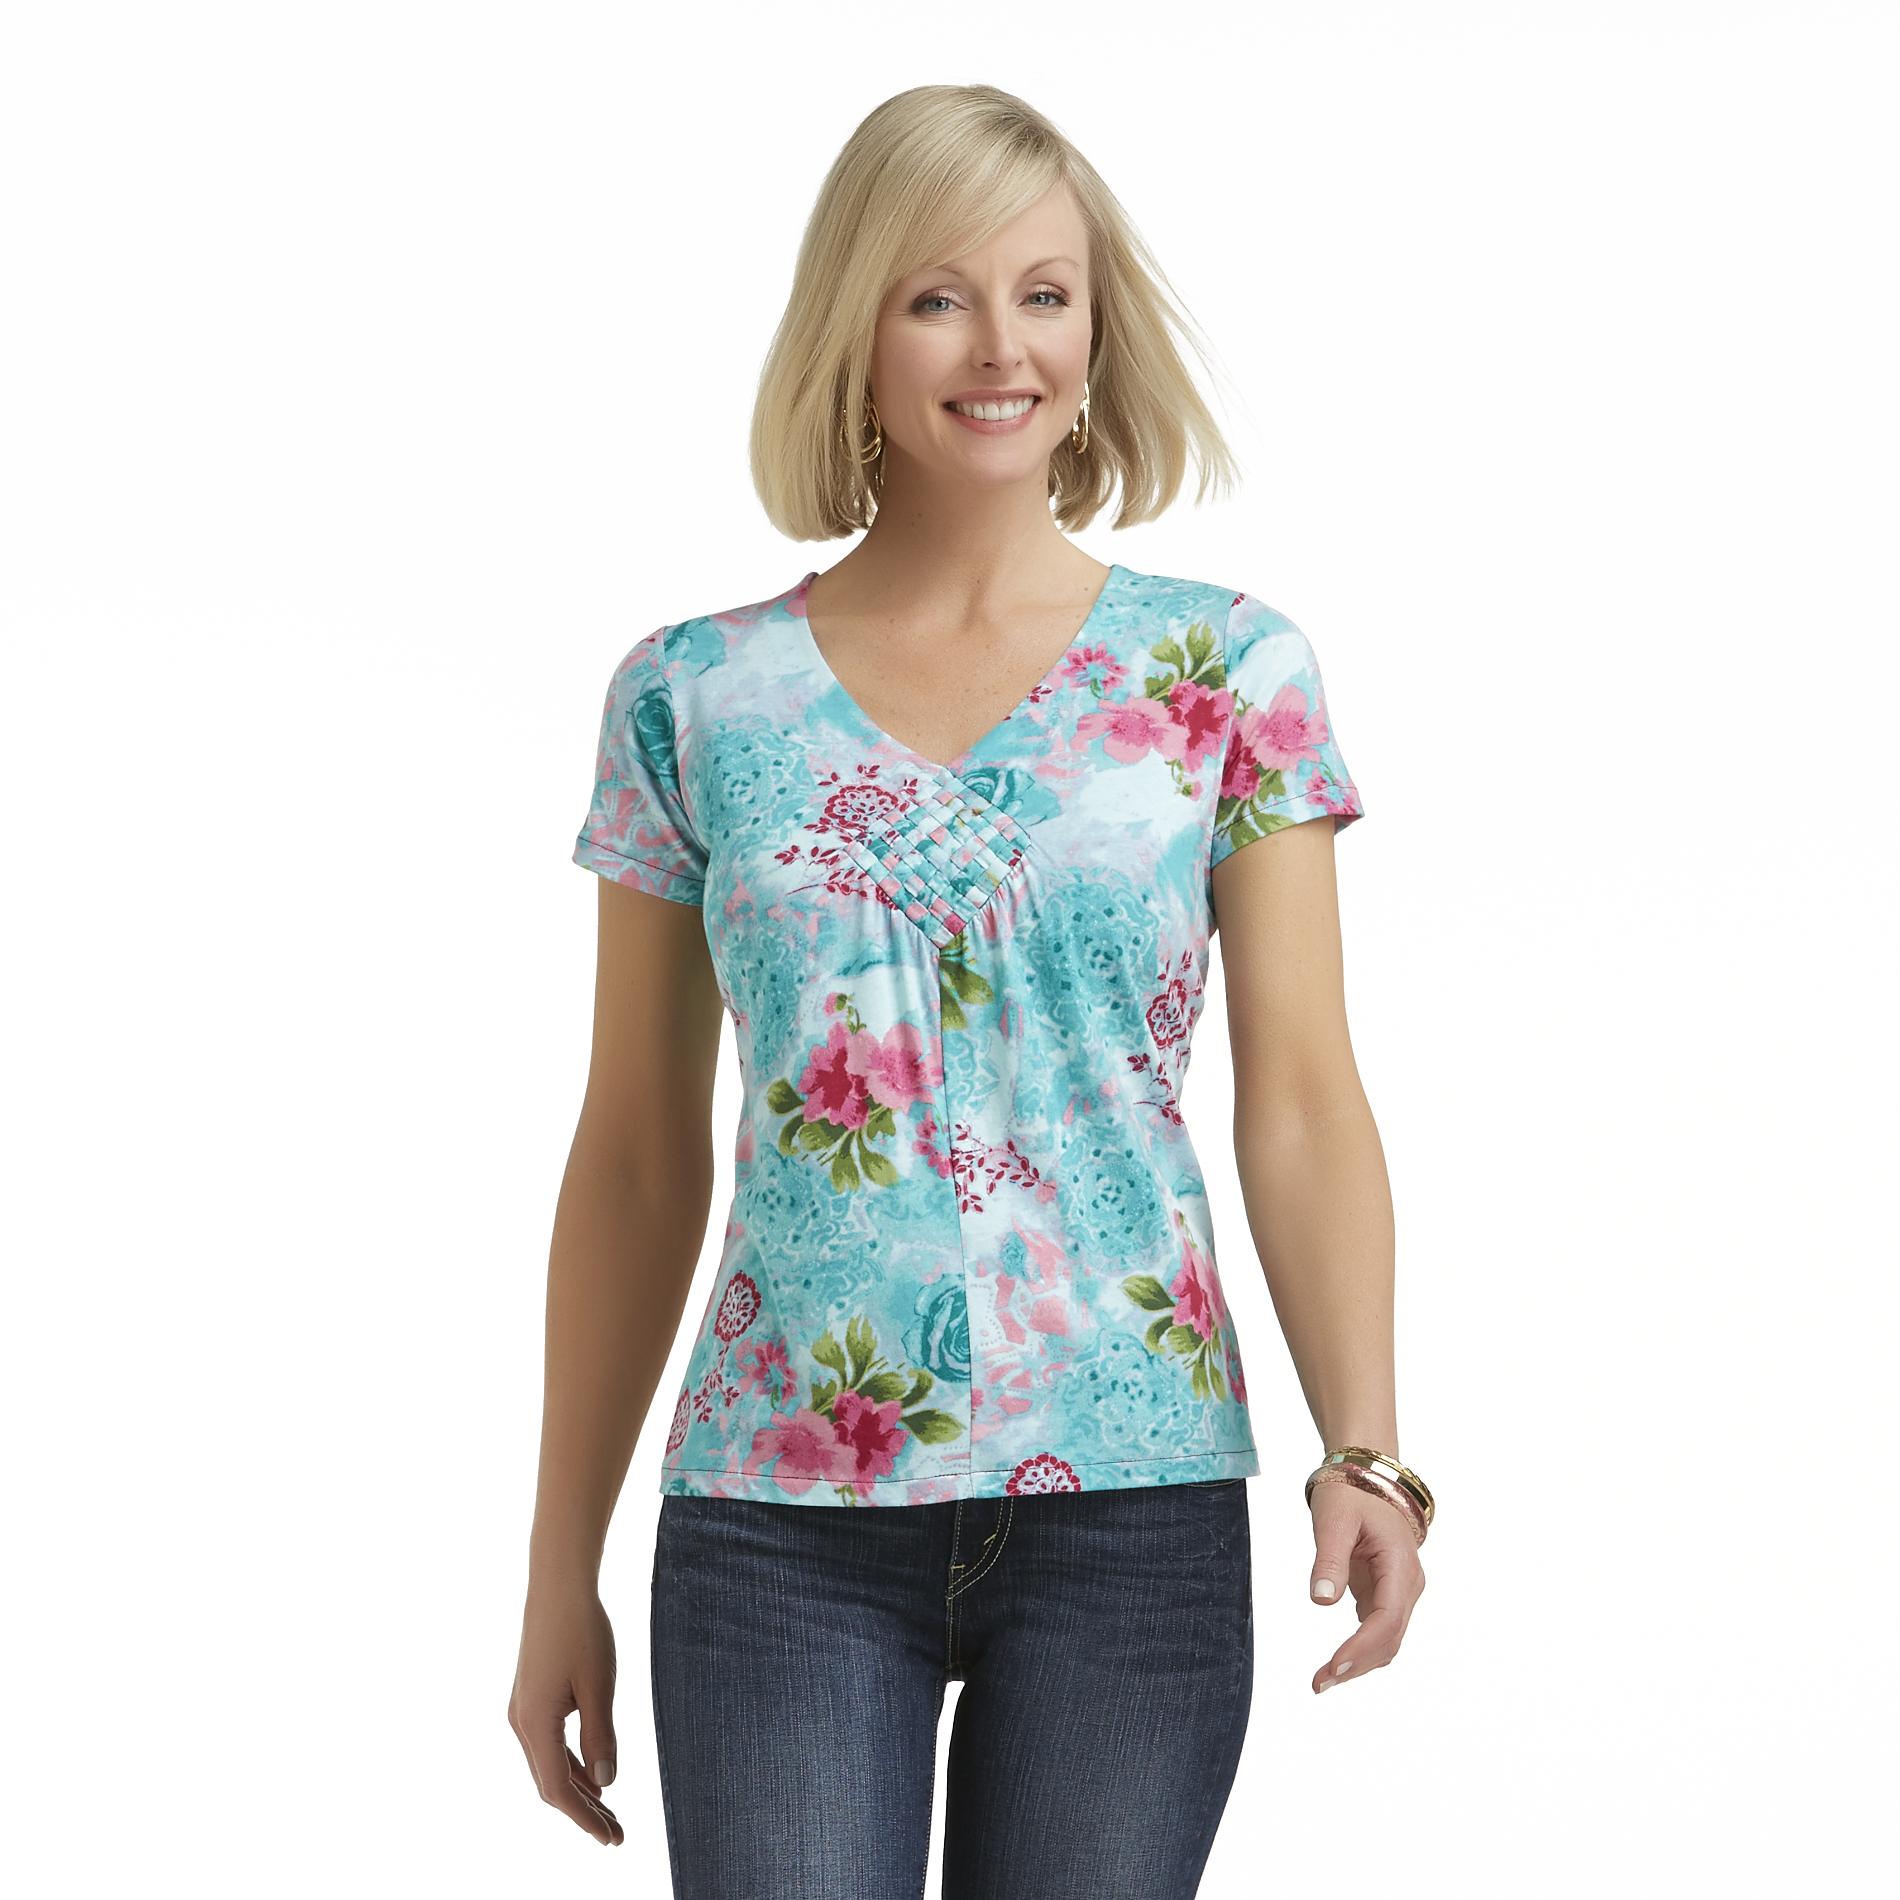 Basic Editions Women's Plus Short-Sleeve Top - Floral